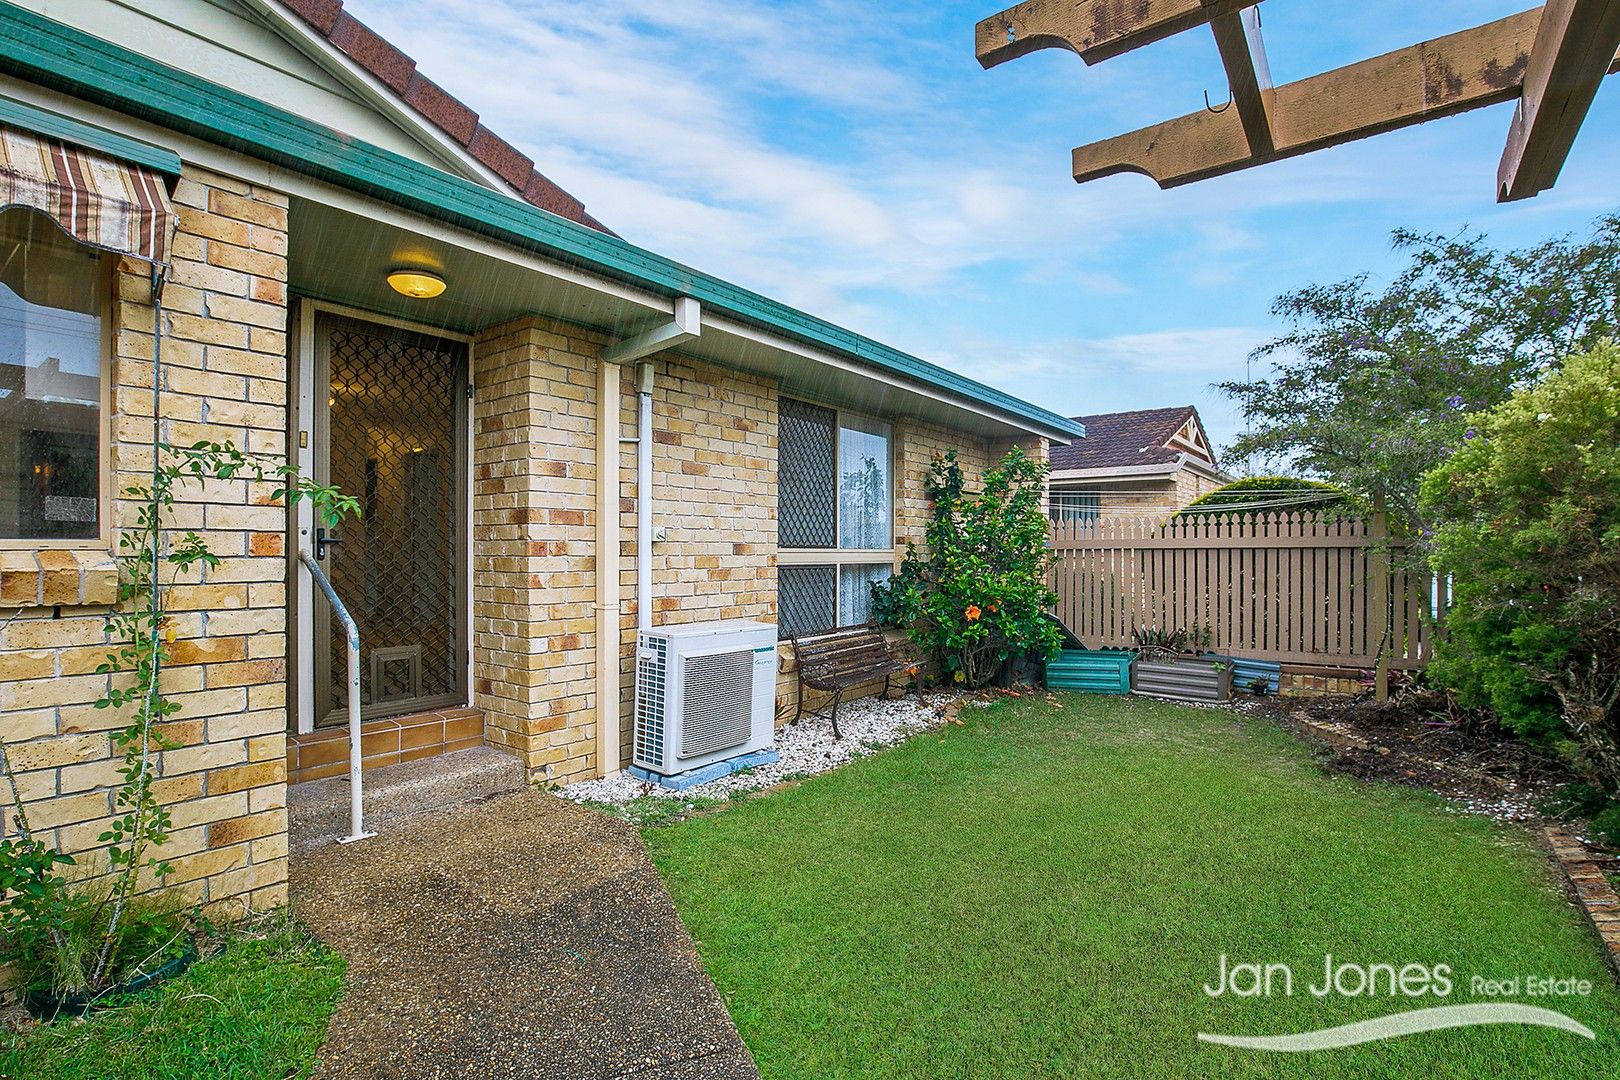 5/381/5/381 Oxley Ave, Margate QLD 4019, Image 1